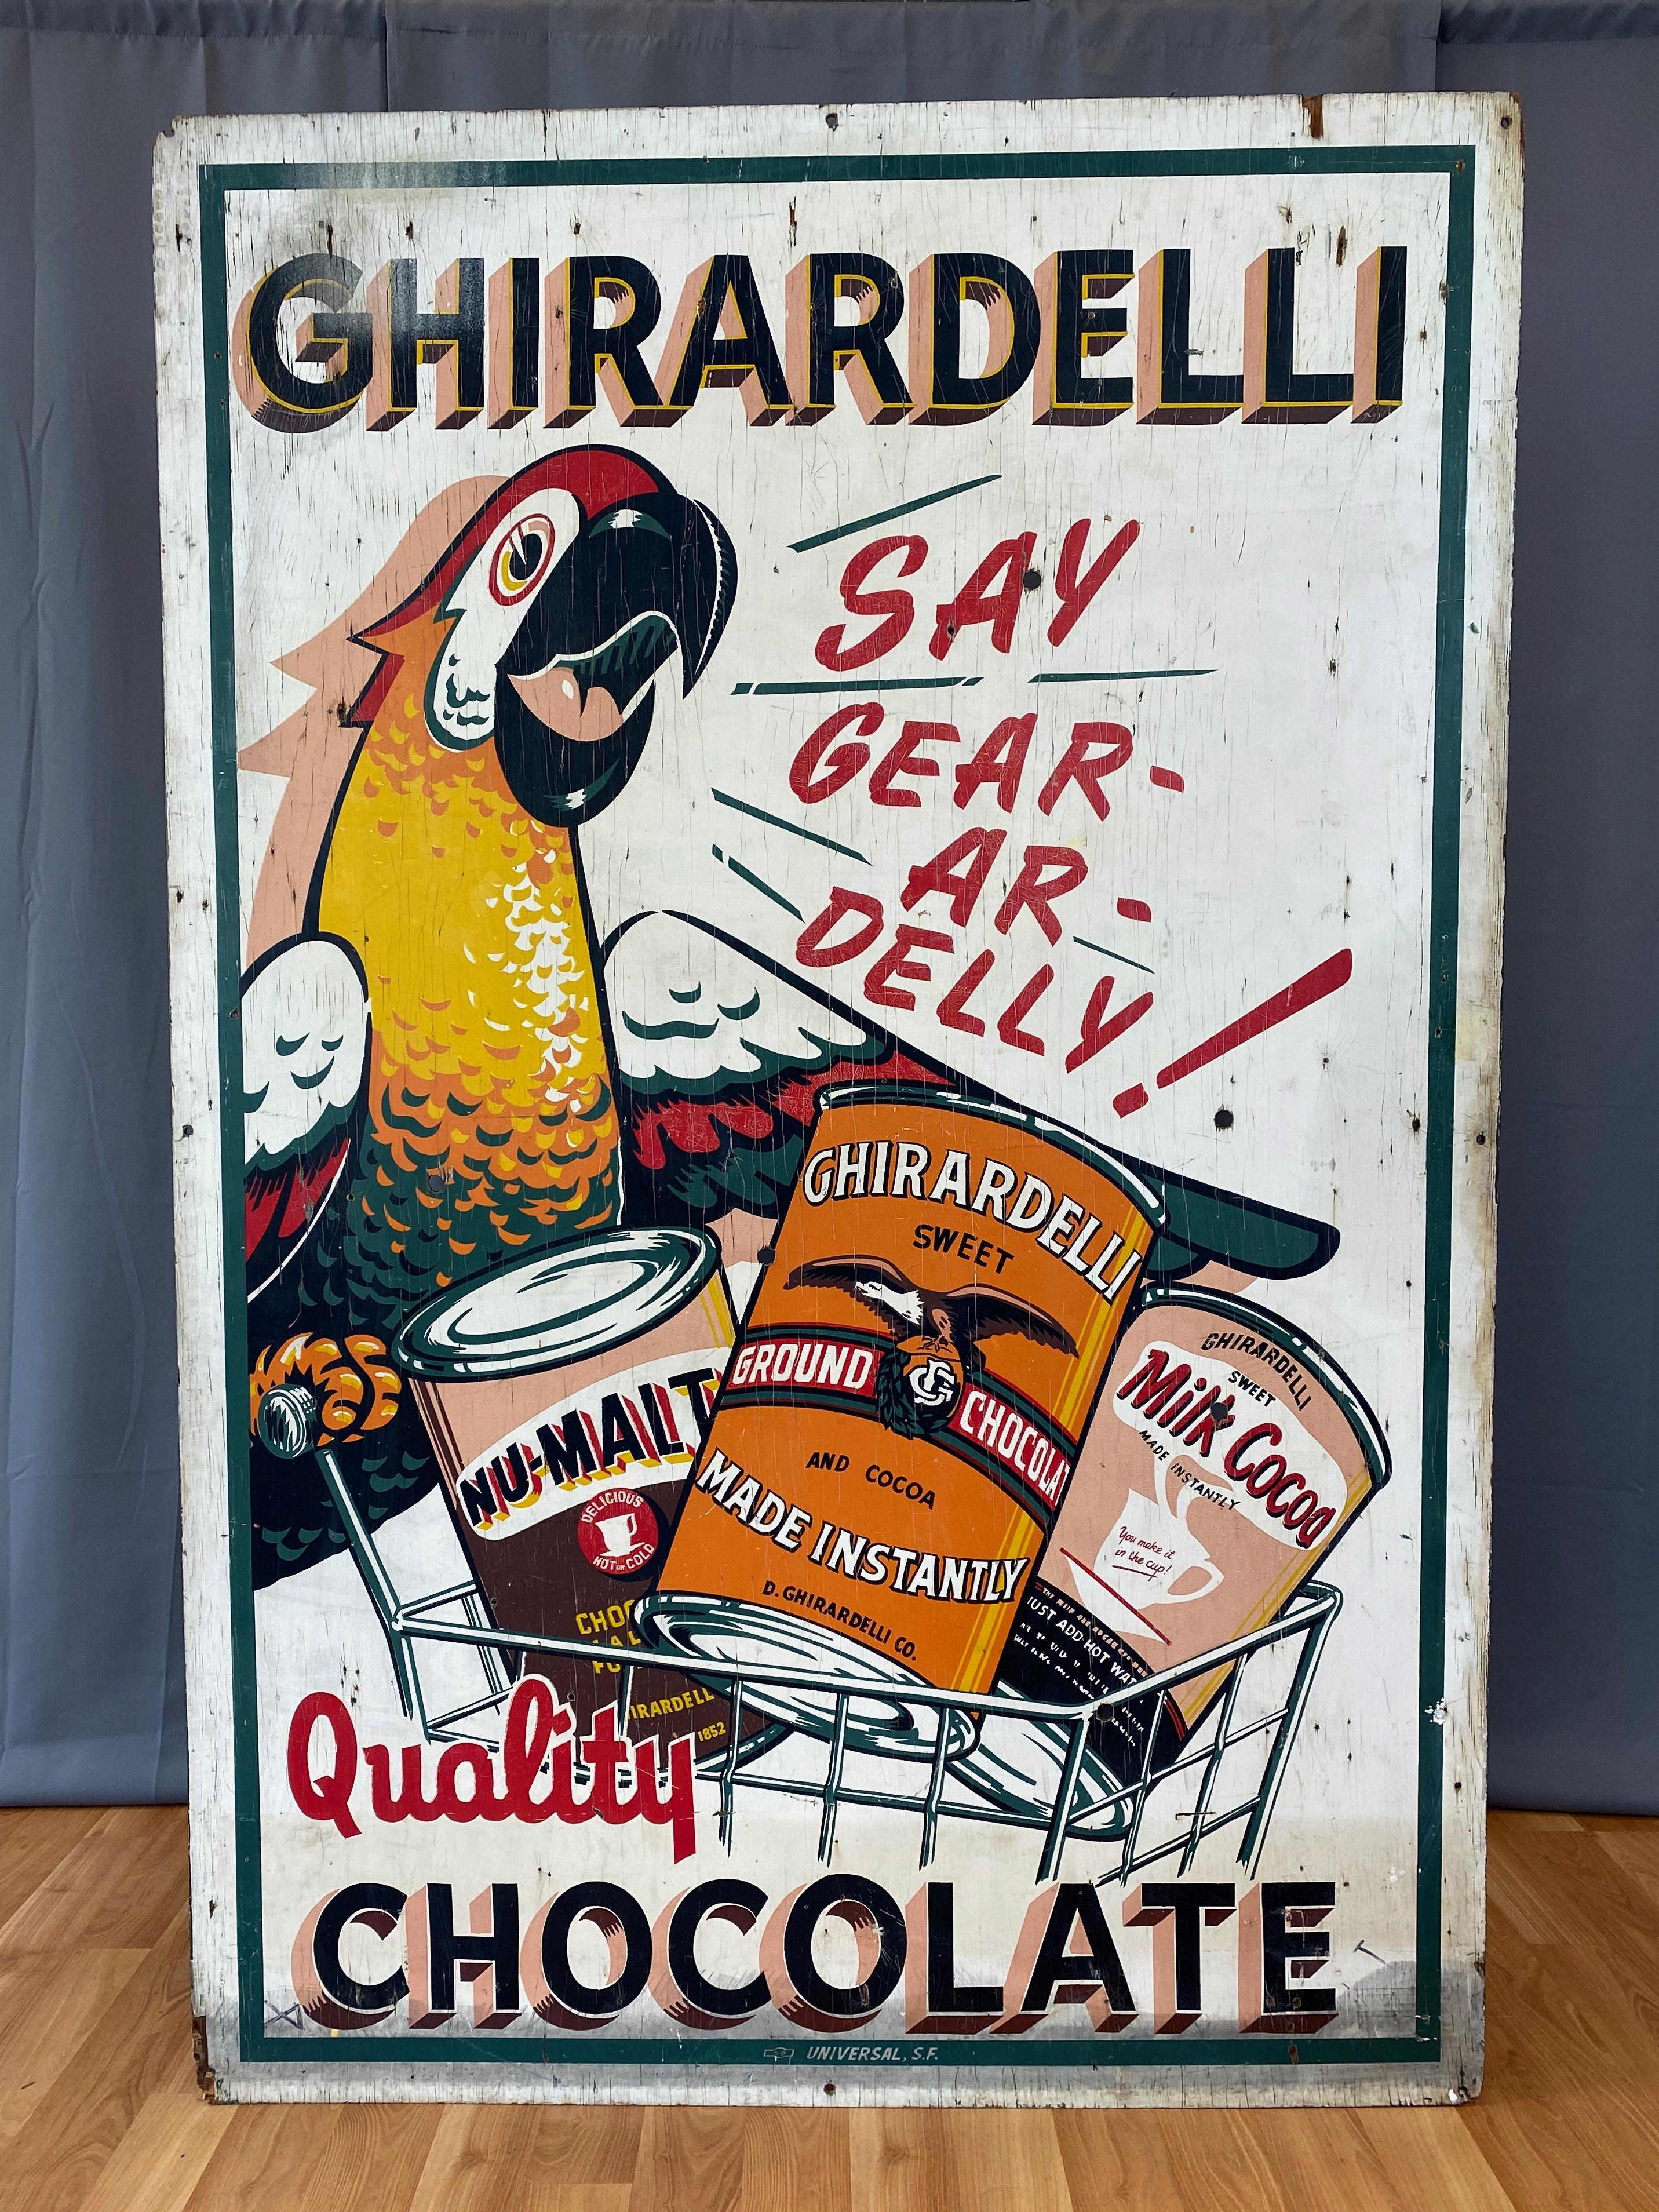 American Huge Ghirardelli Chocolate Parrot Mascot Painted Wood Advertising Sign, 1930s